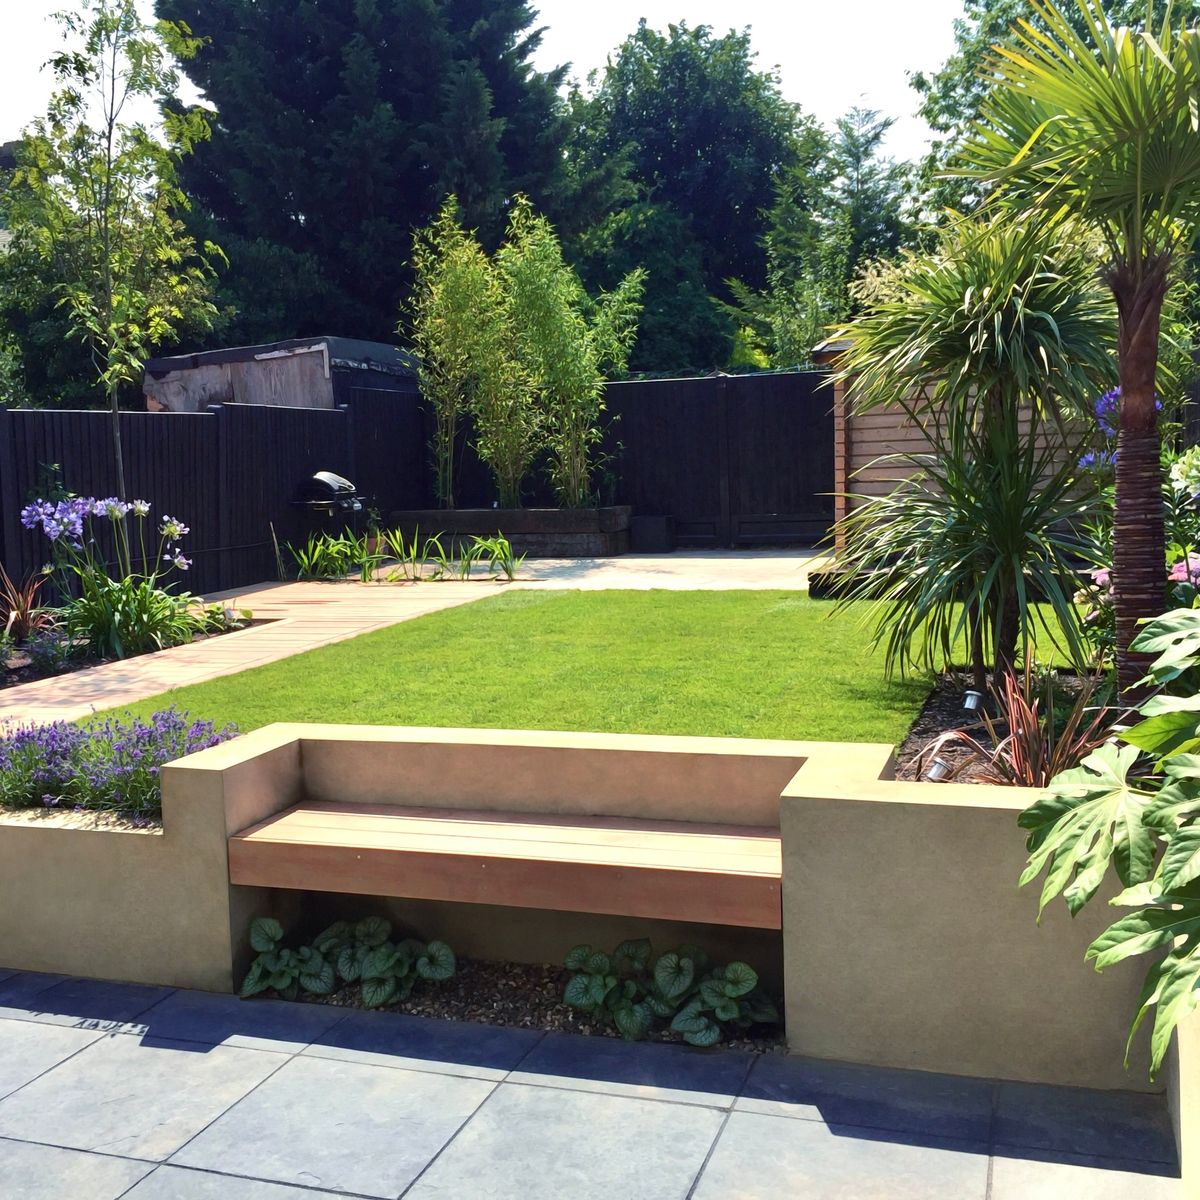 Paving Installation, Decking and Built-In Seating